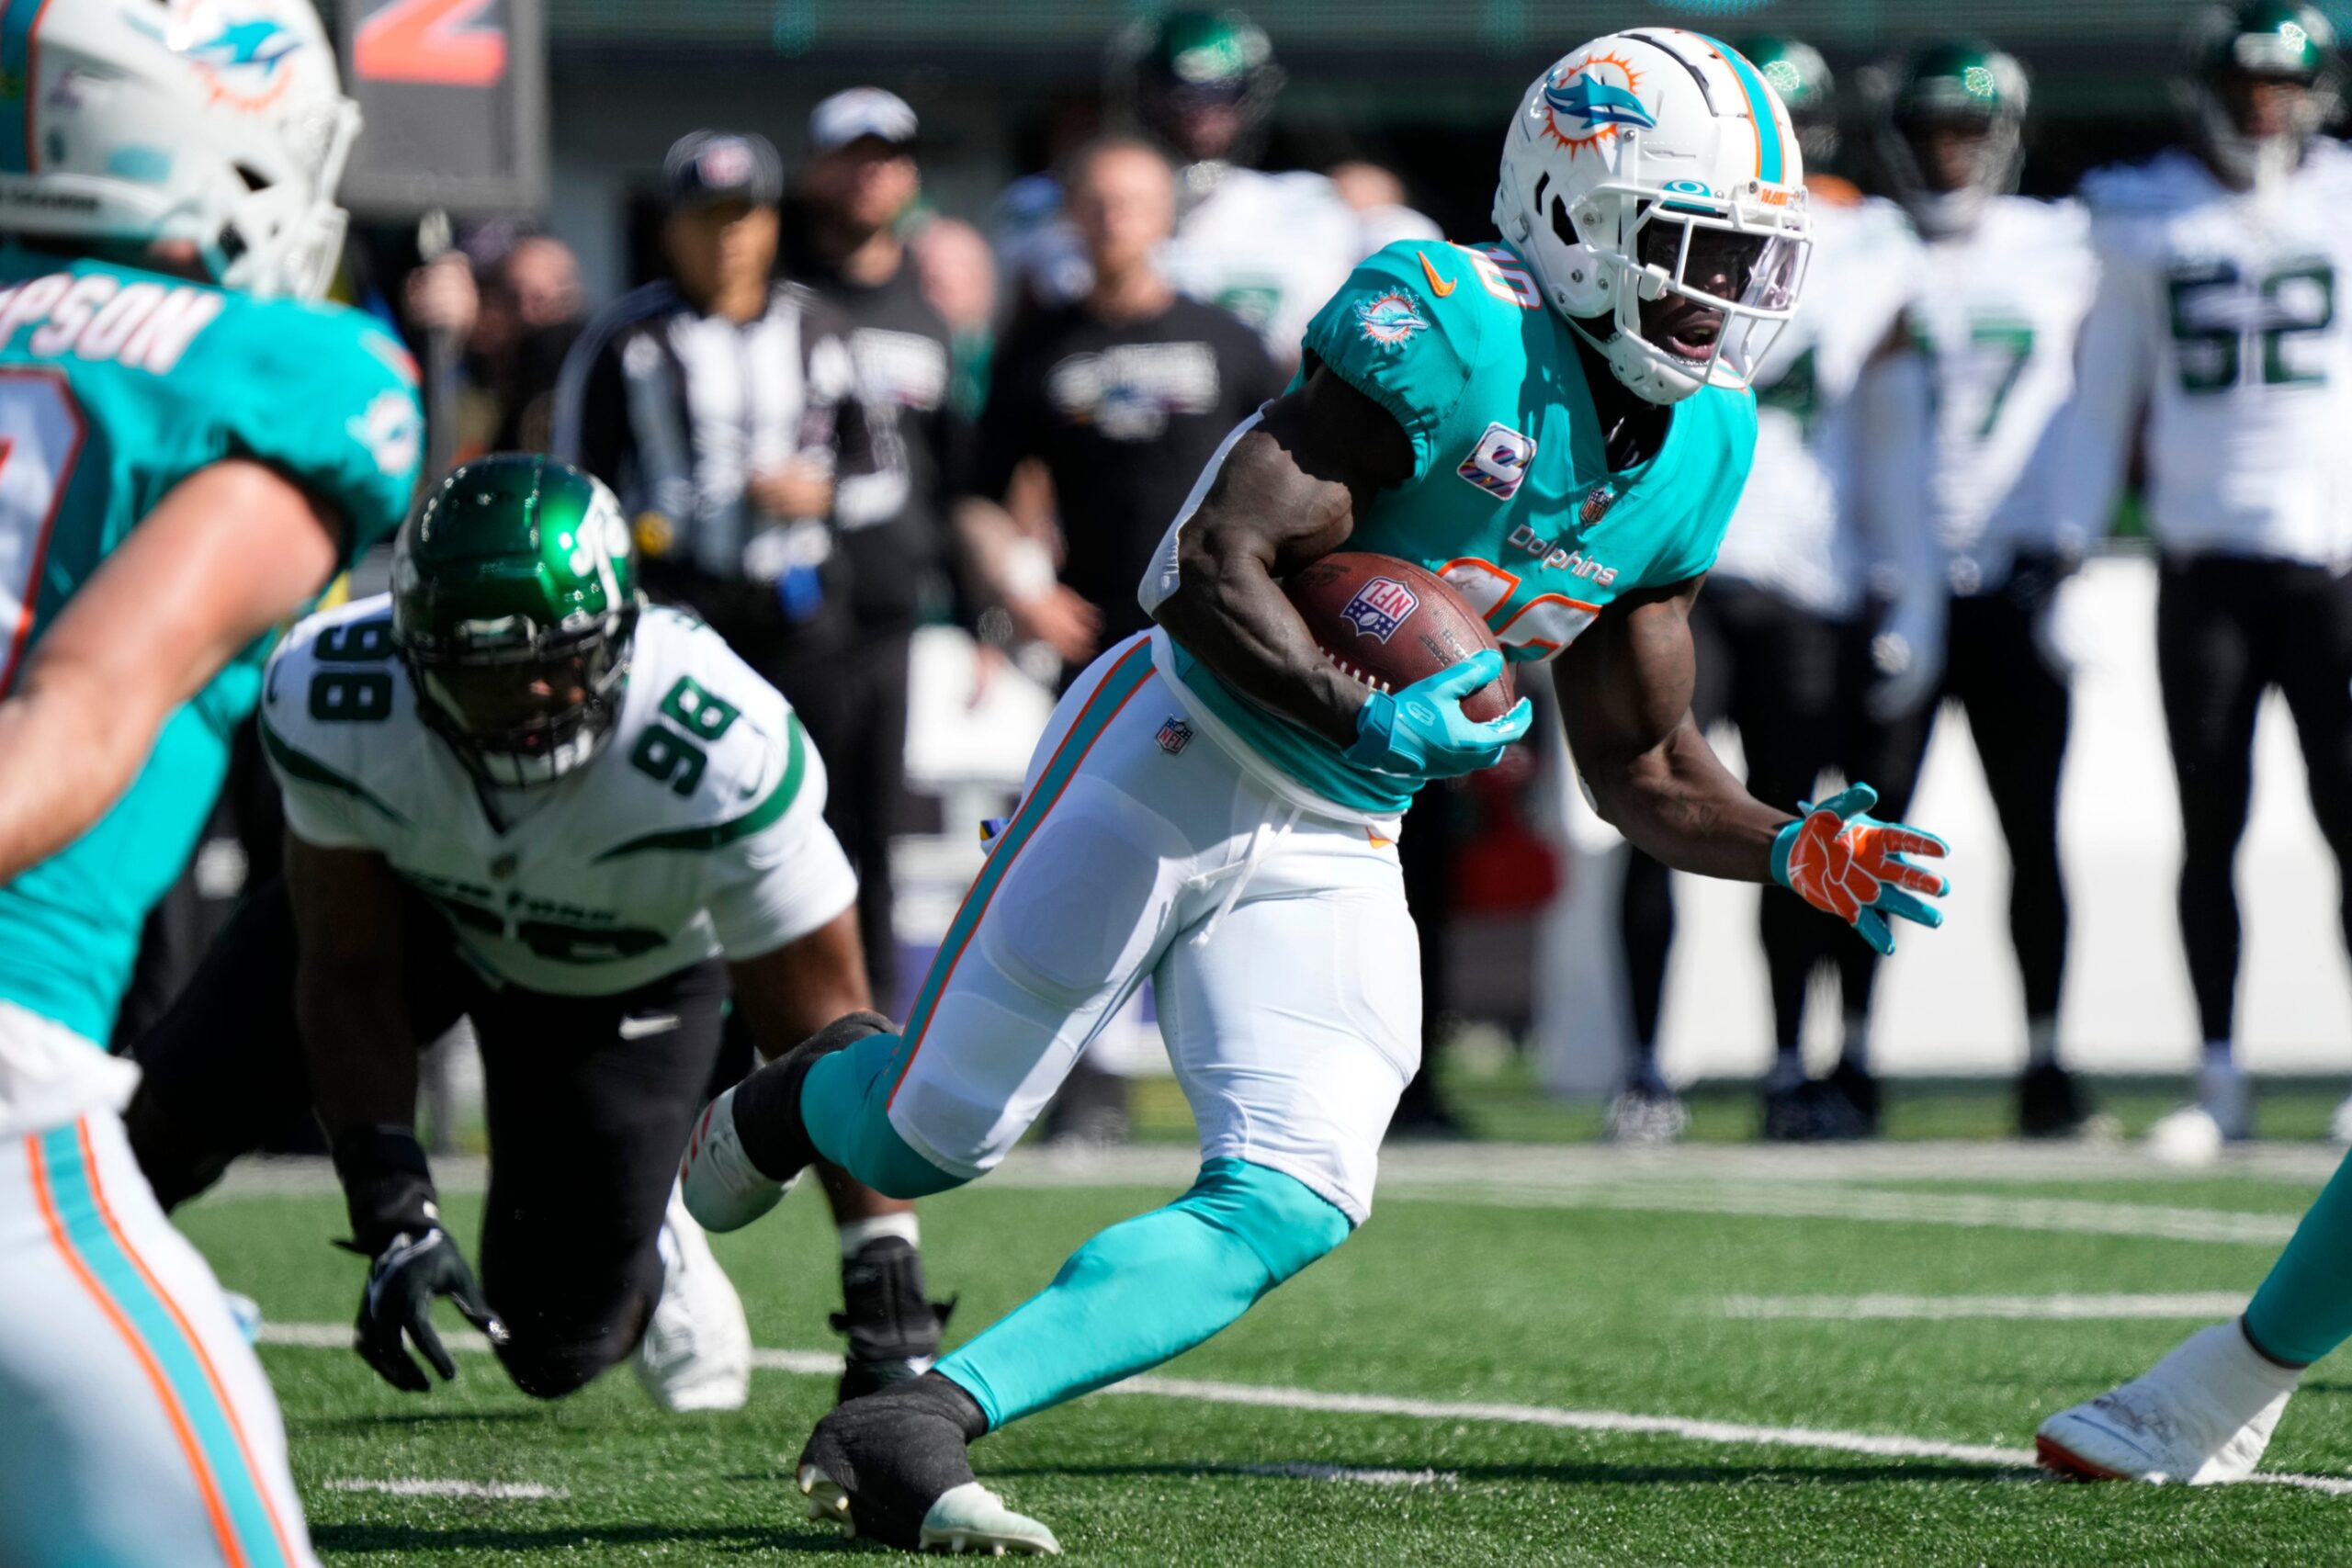 NFL Week 18 Best Bets Based on Likely Outcomes for Dolphins vs